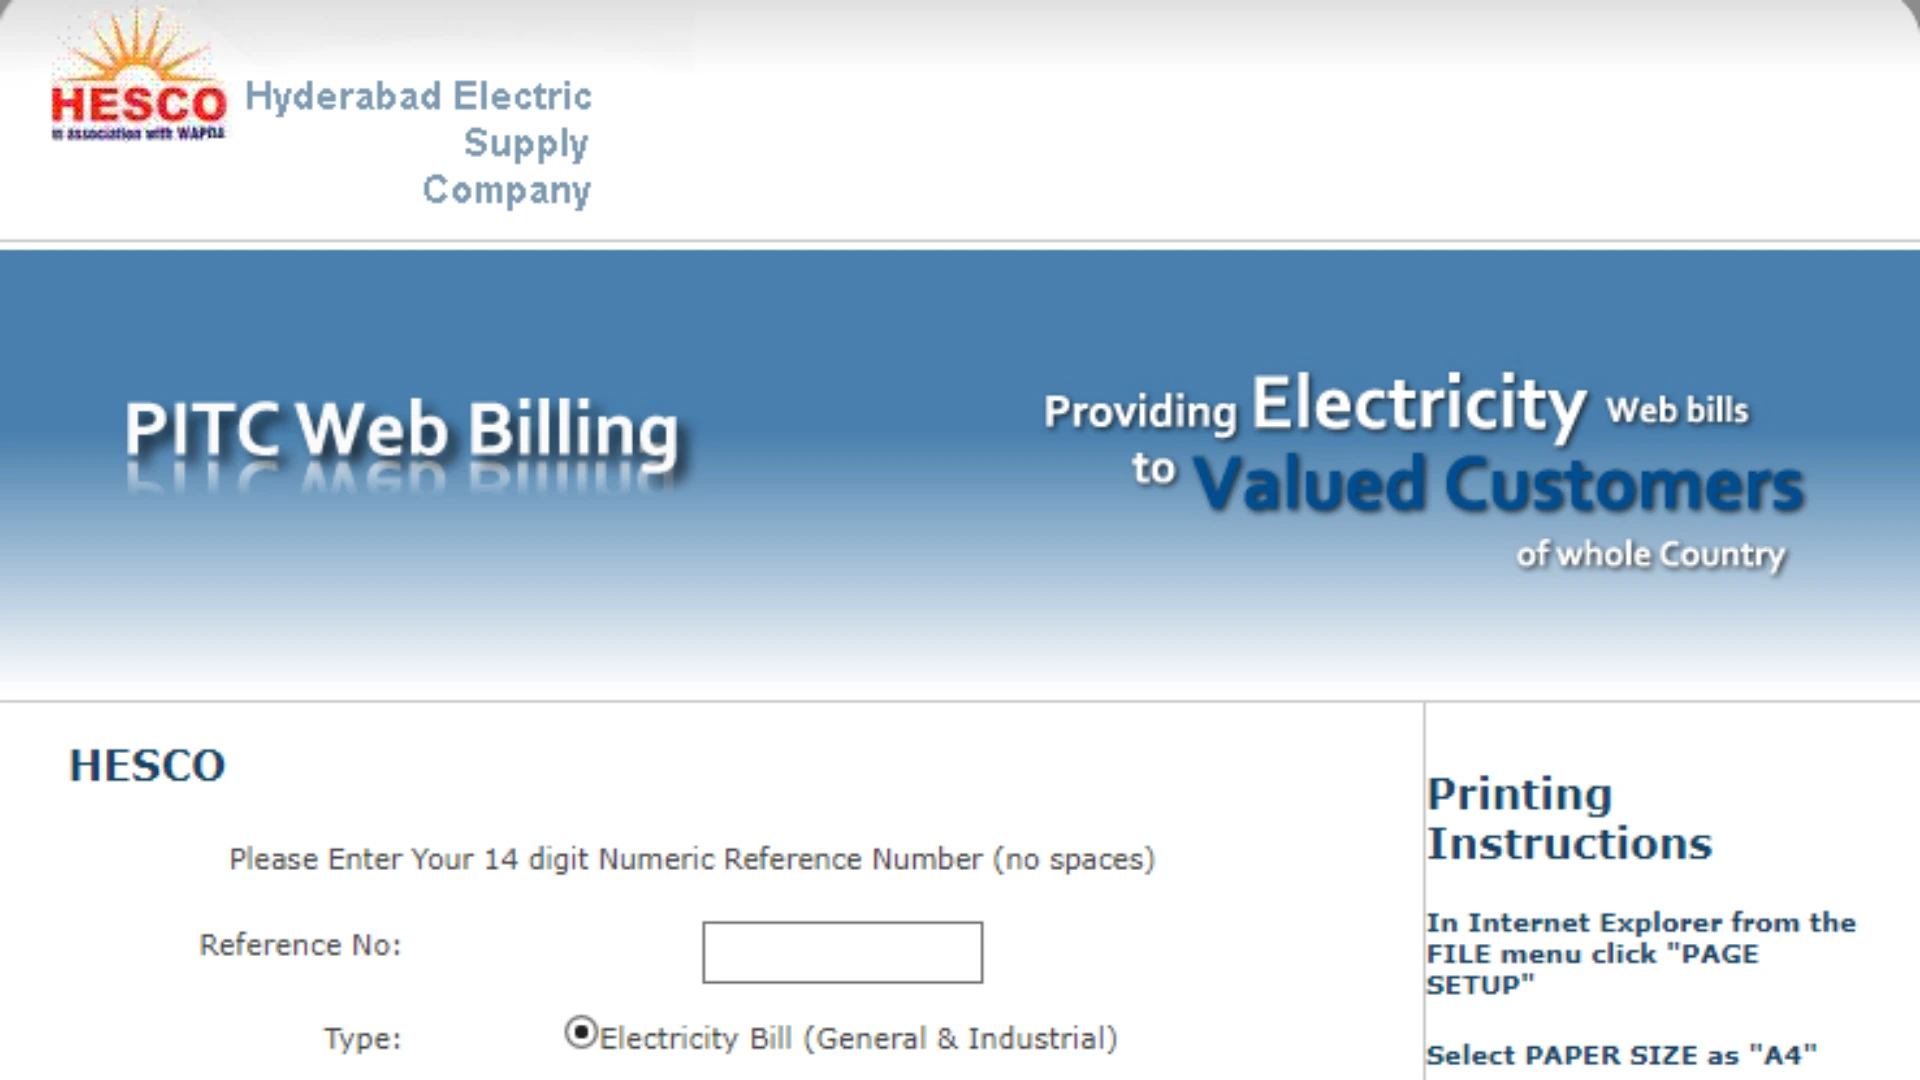 About the HESCO Online Bill